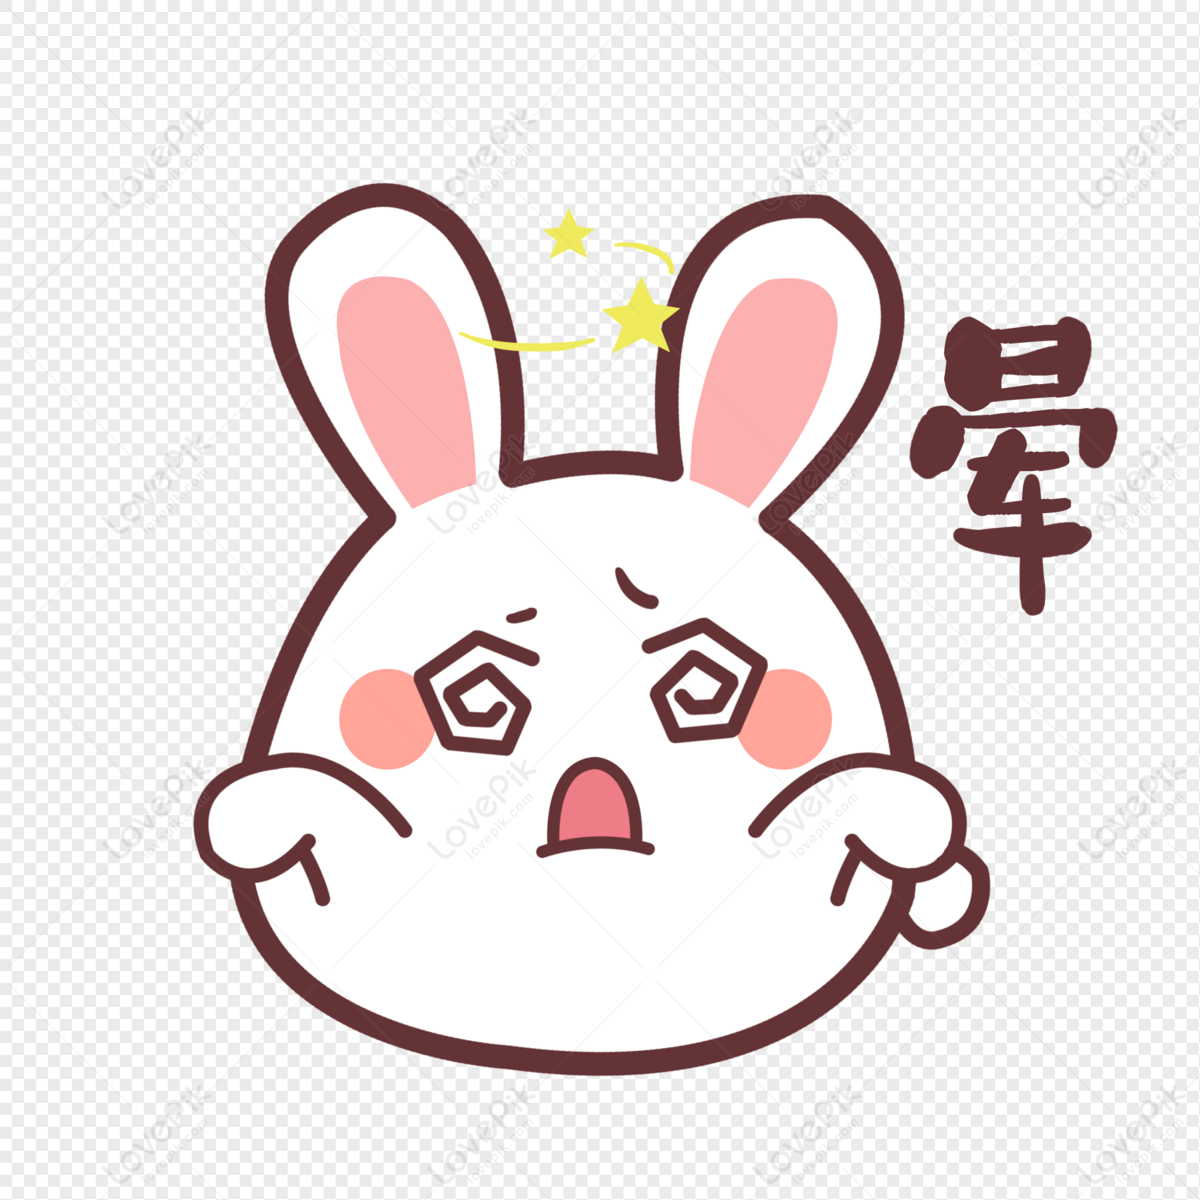 Cartoon Rabbit With Dizzy Expression PNG Image Free Download And ...